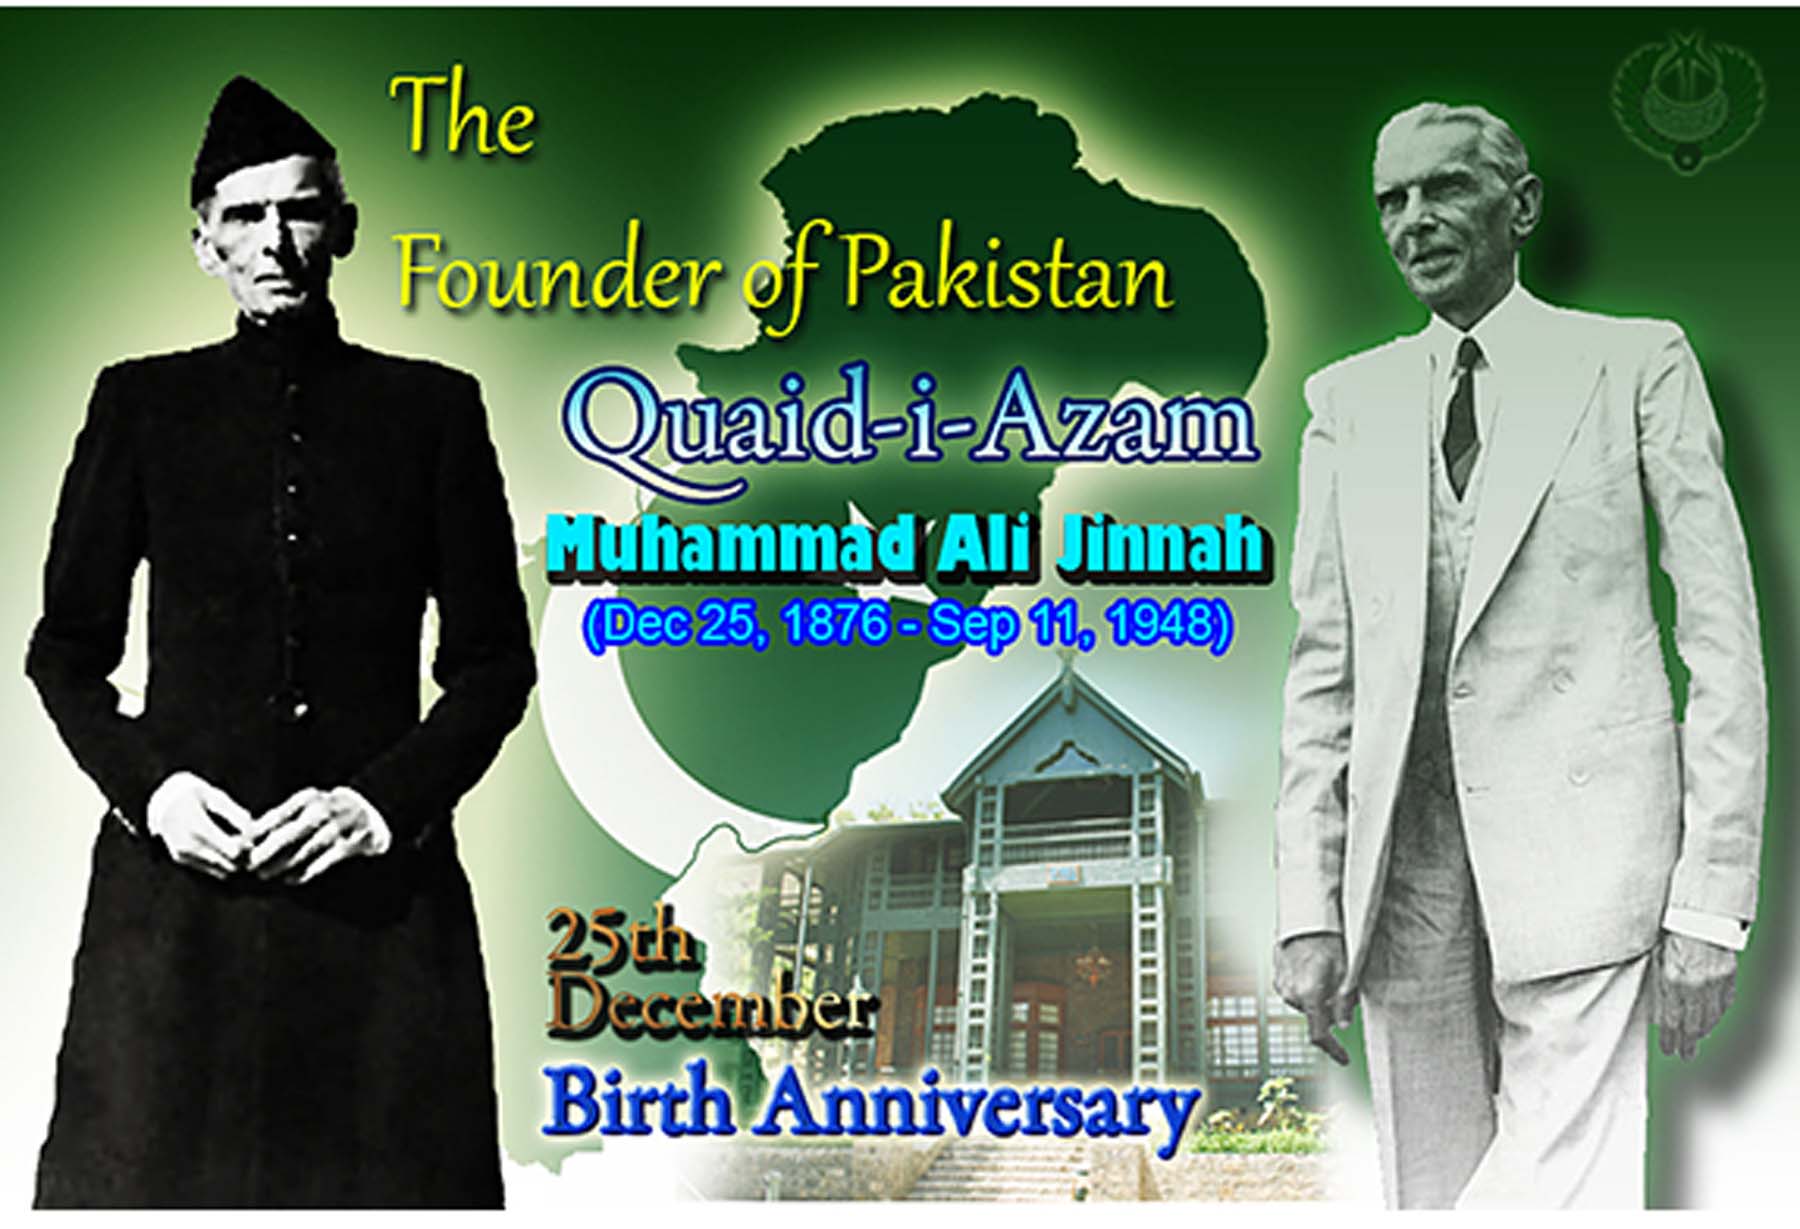 Exhibition on life of Quaid-i-Azam continues at PCA